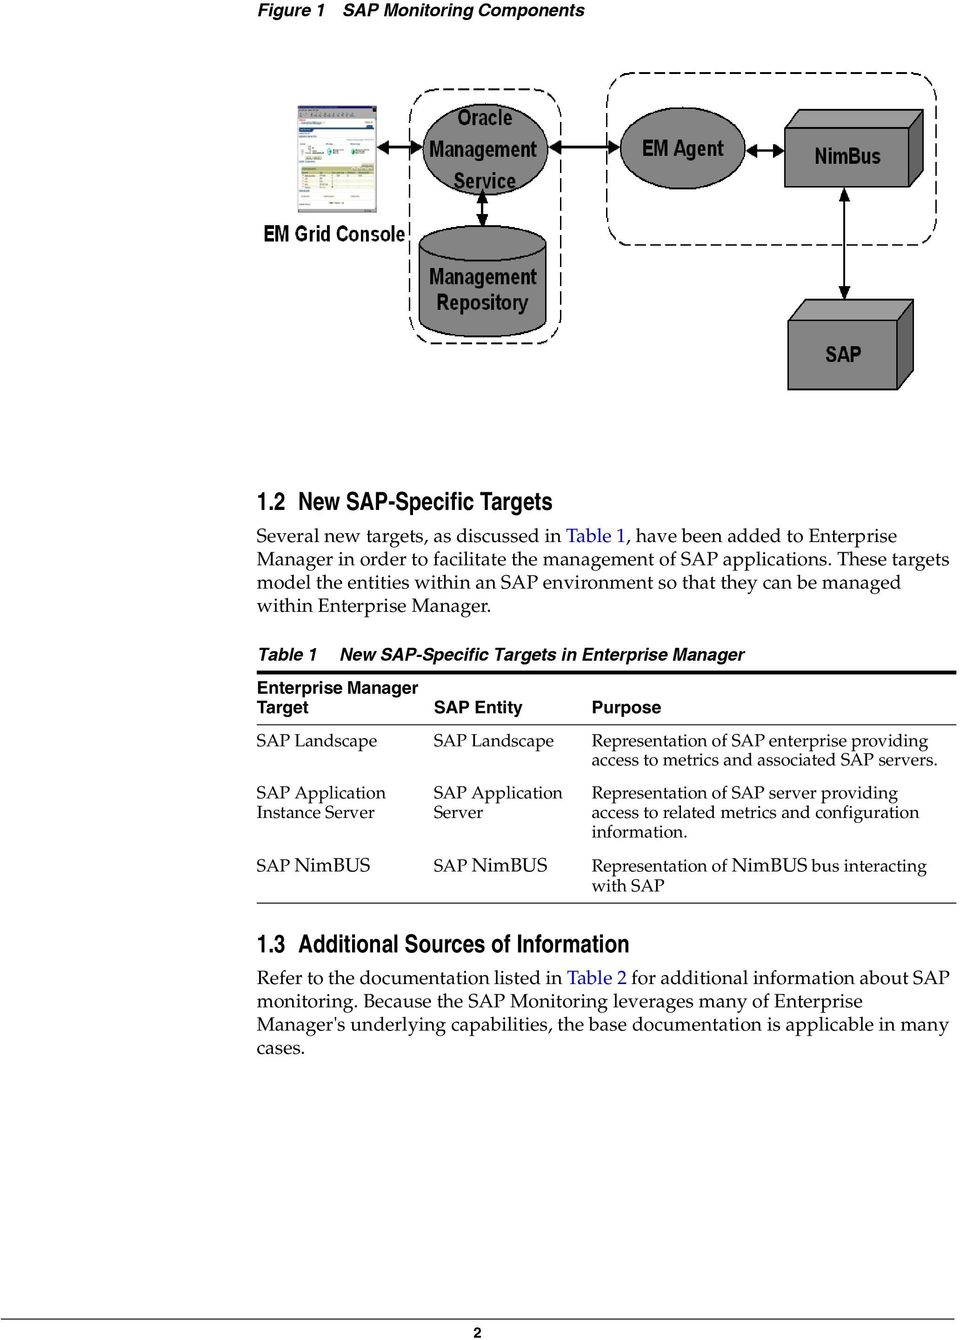 These targets model the entities within an SAP environment so that they can be managed within Enterprise Manager.